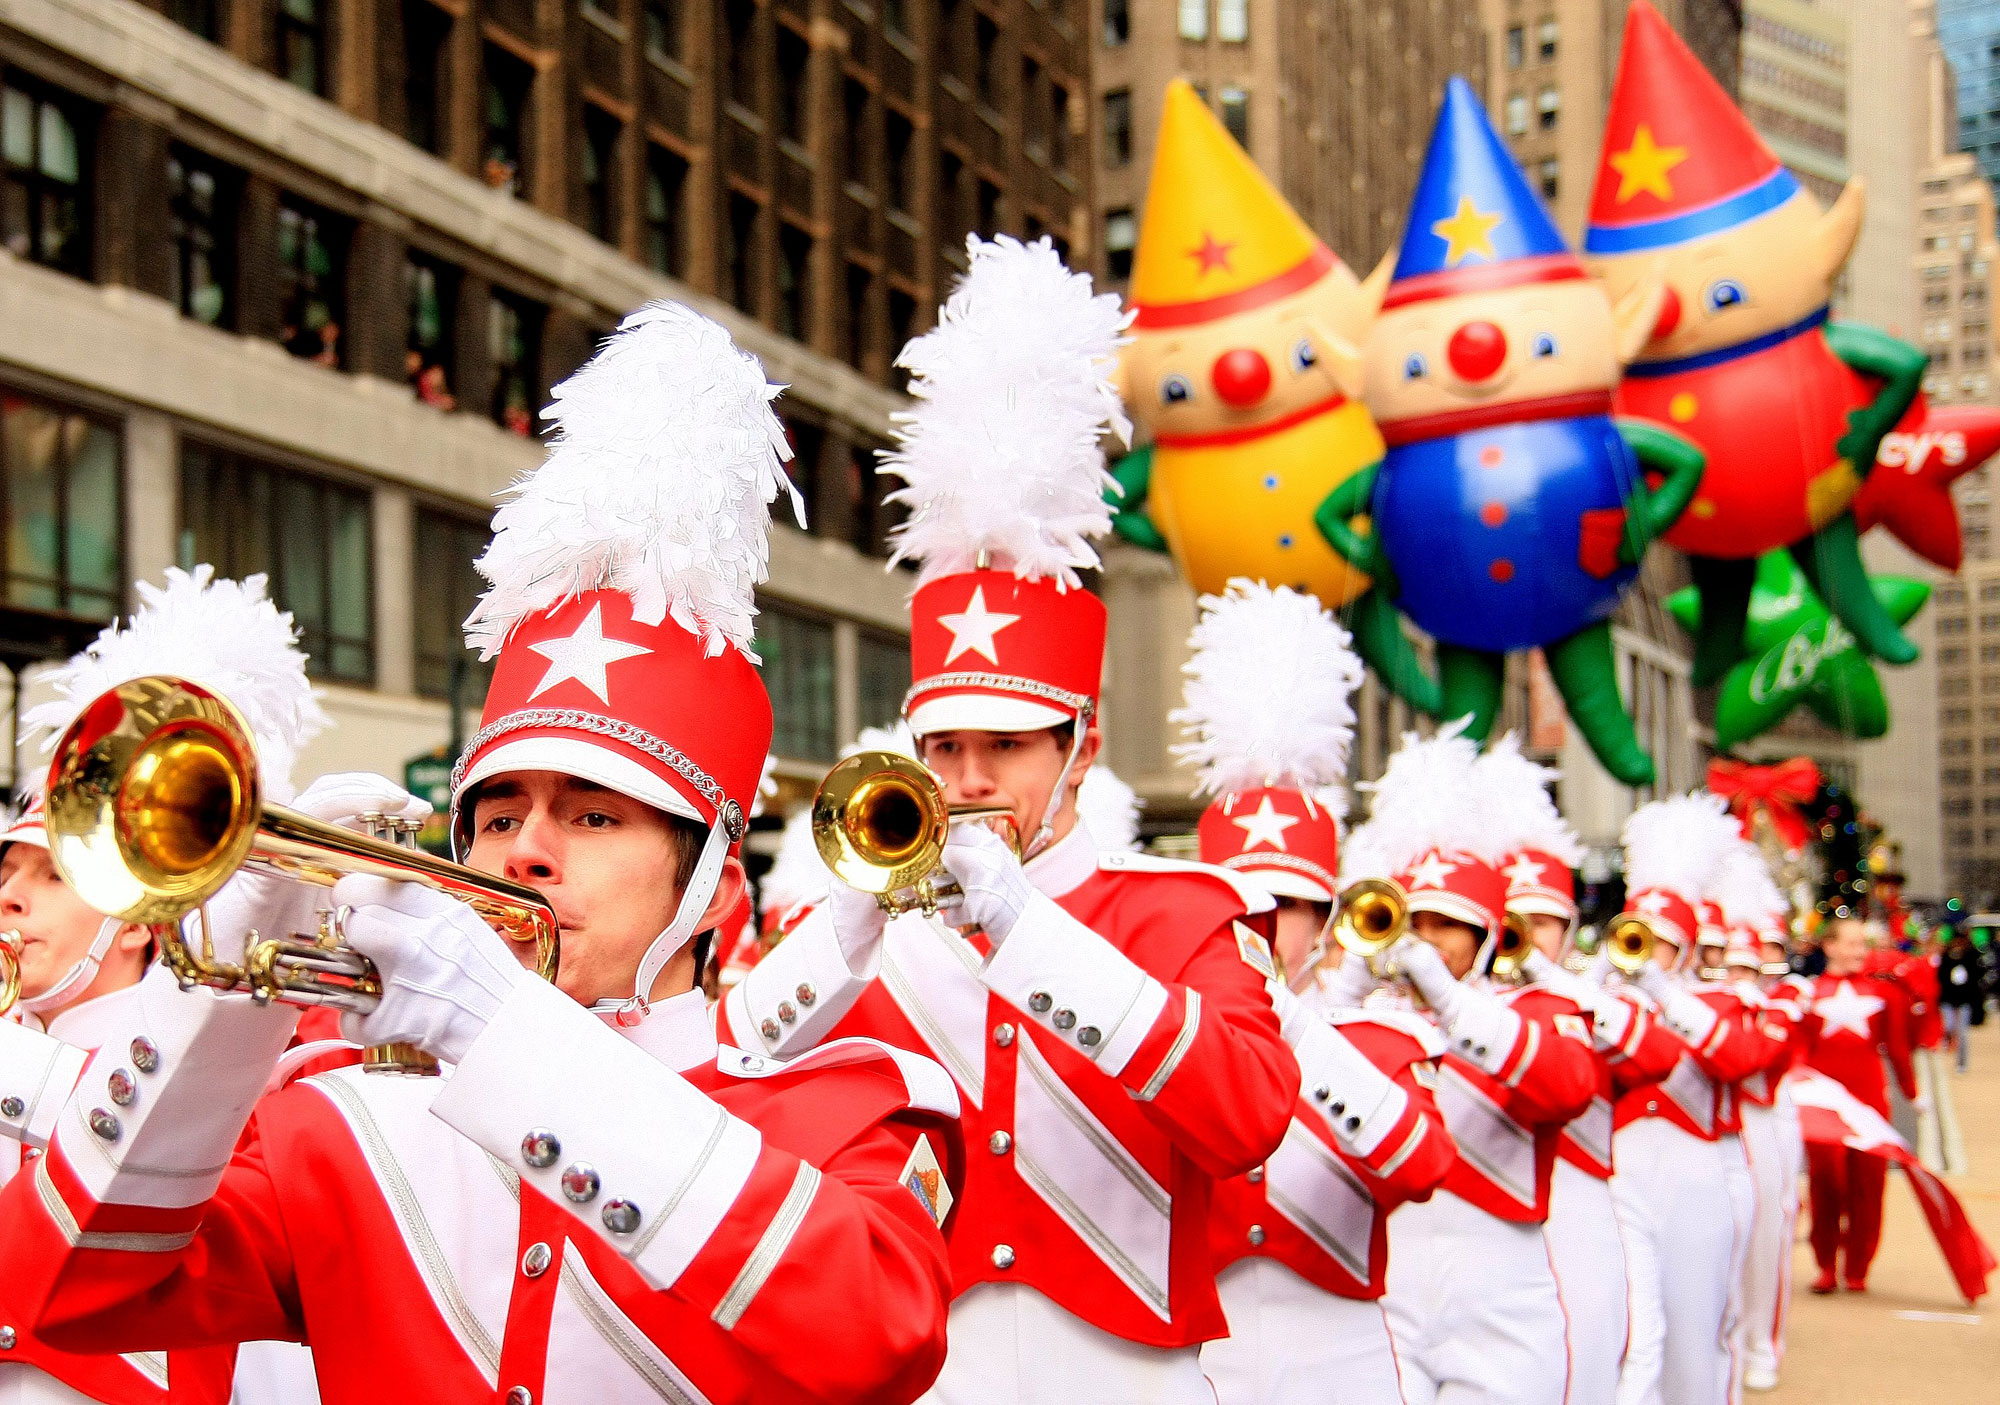 macys-great-american-marching-band-in-macys-thanksgiving-day-parade.jpg